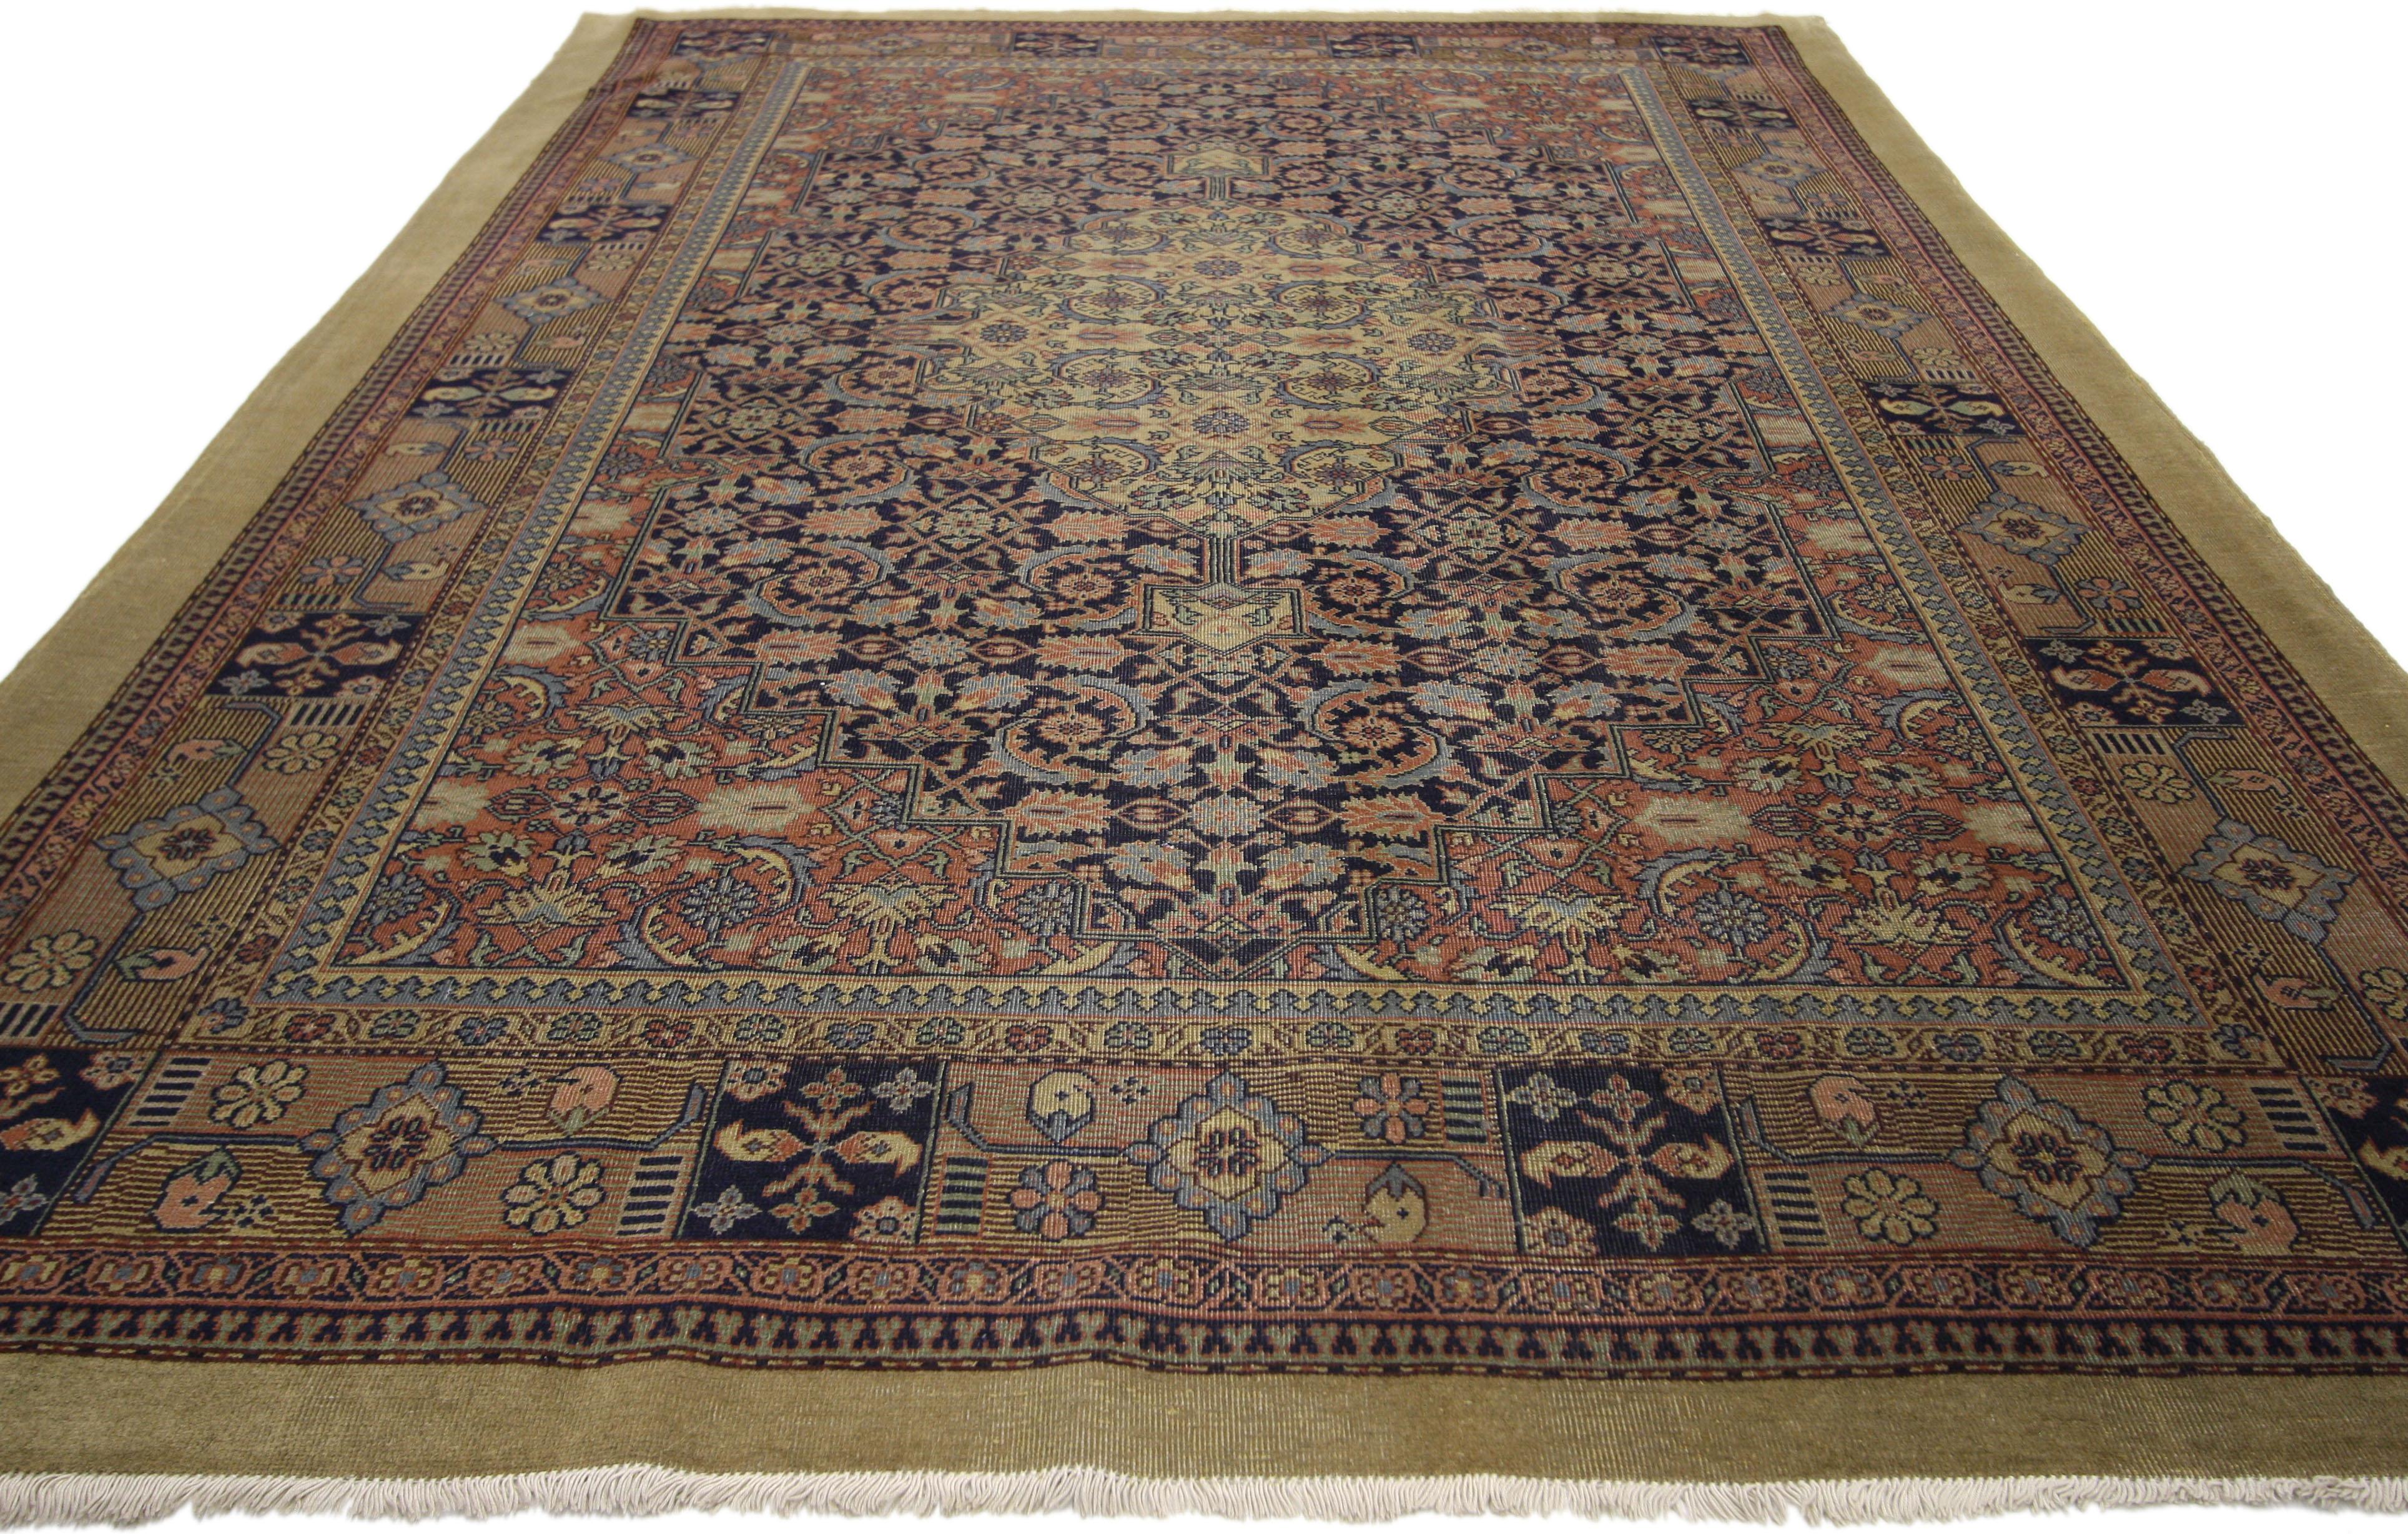 71853, Distressed Persian Malayer style area rug. Gorgeous dense ornament fills the carpet field in this Distressed Persian Malayer style rug. A colorful latticework links the medallion and spandrels, all melding seamlessly together in a delicate,